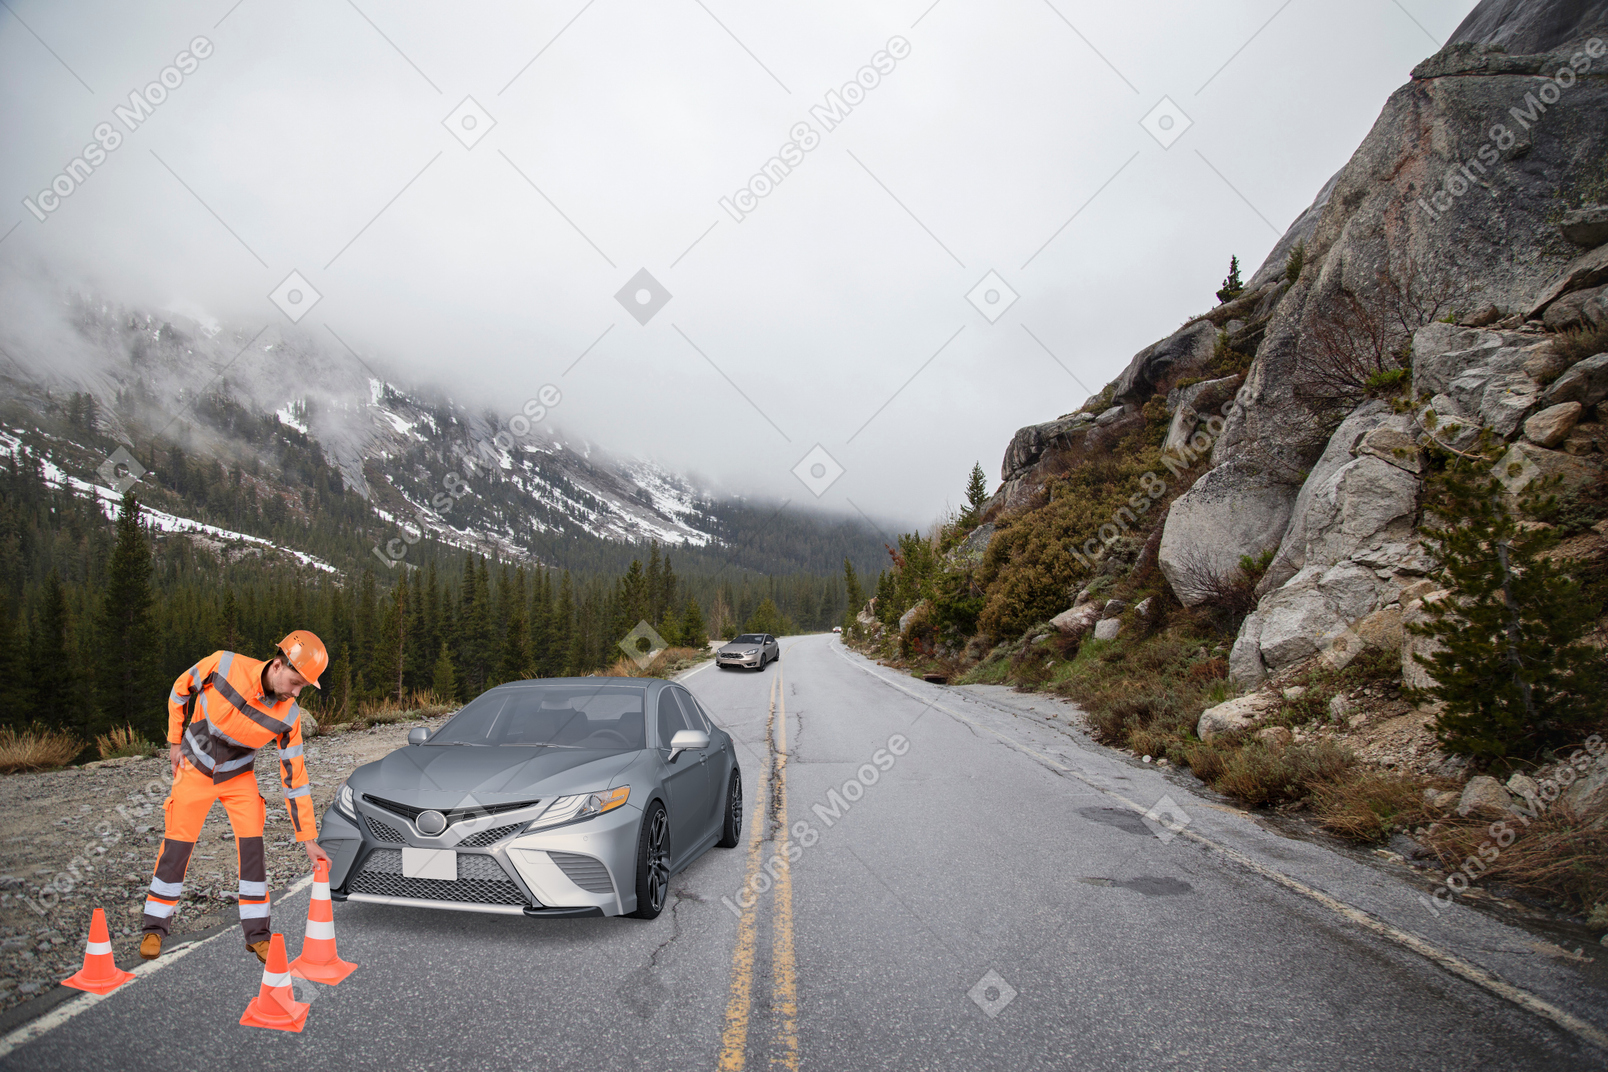 A road worker standing next to a car on the side of a road